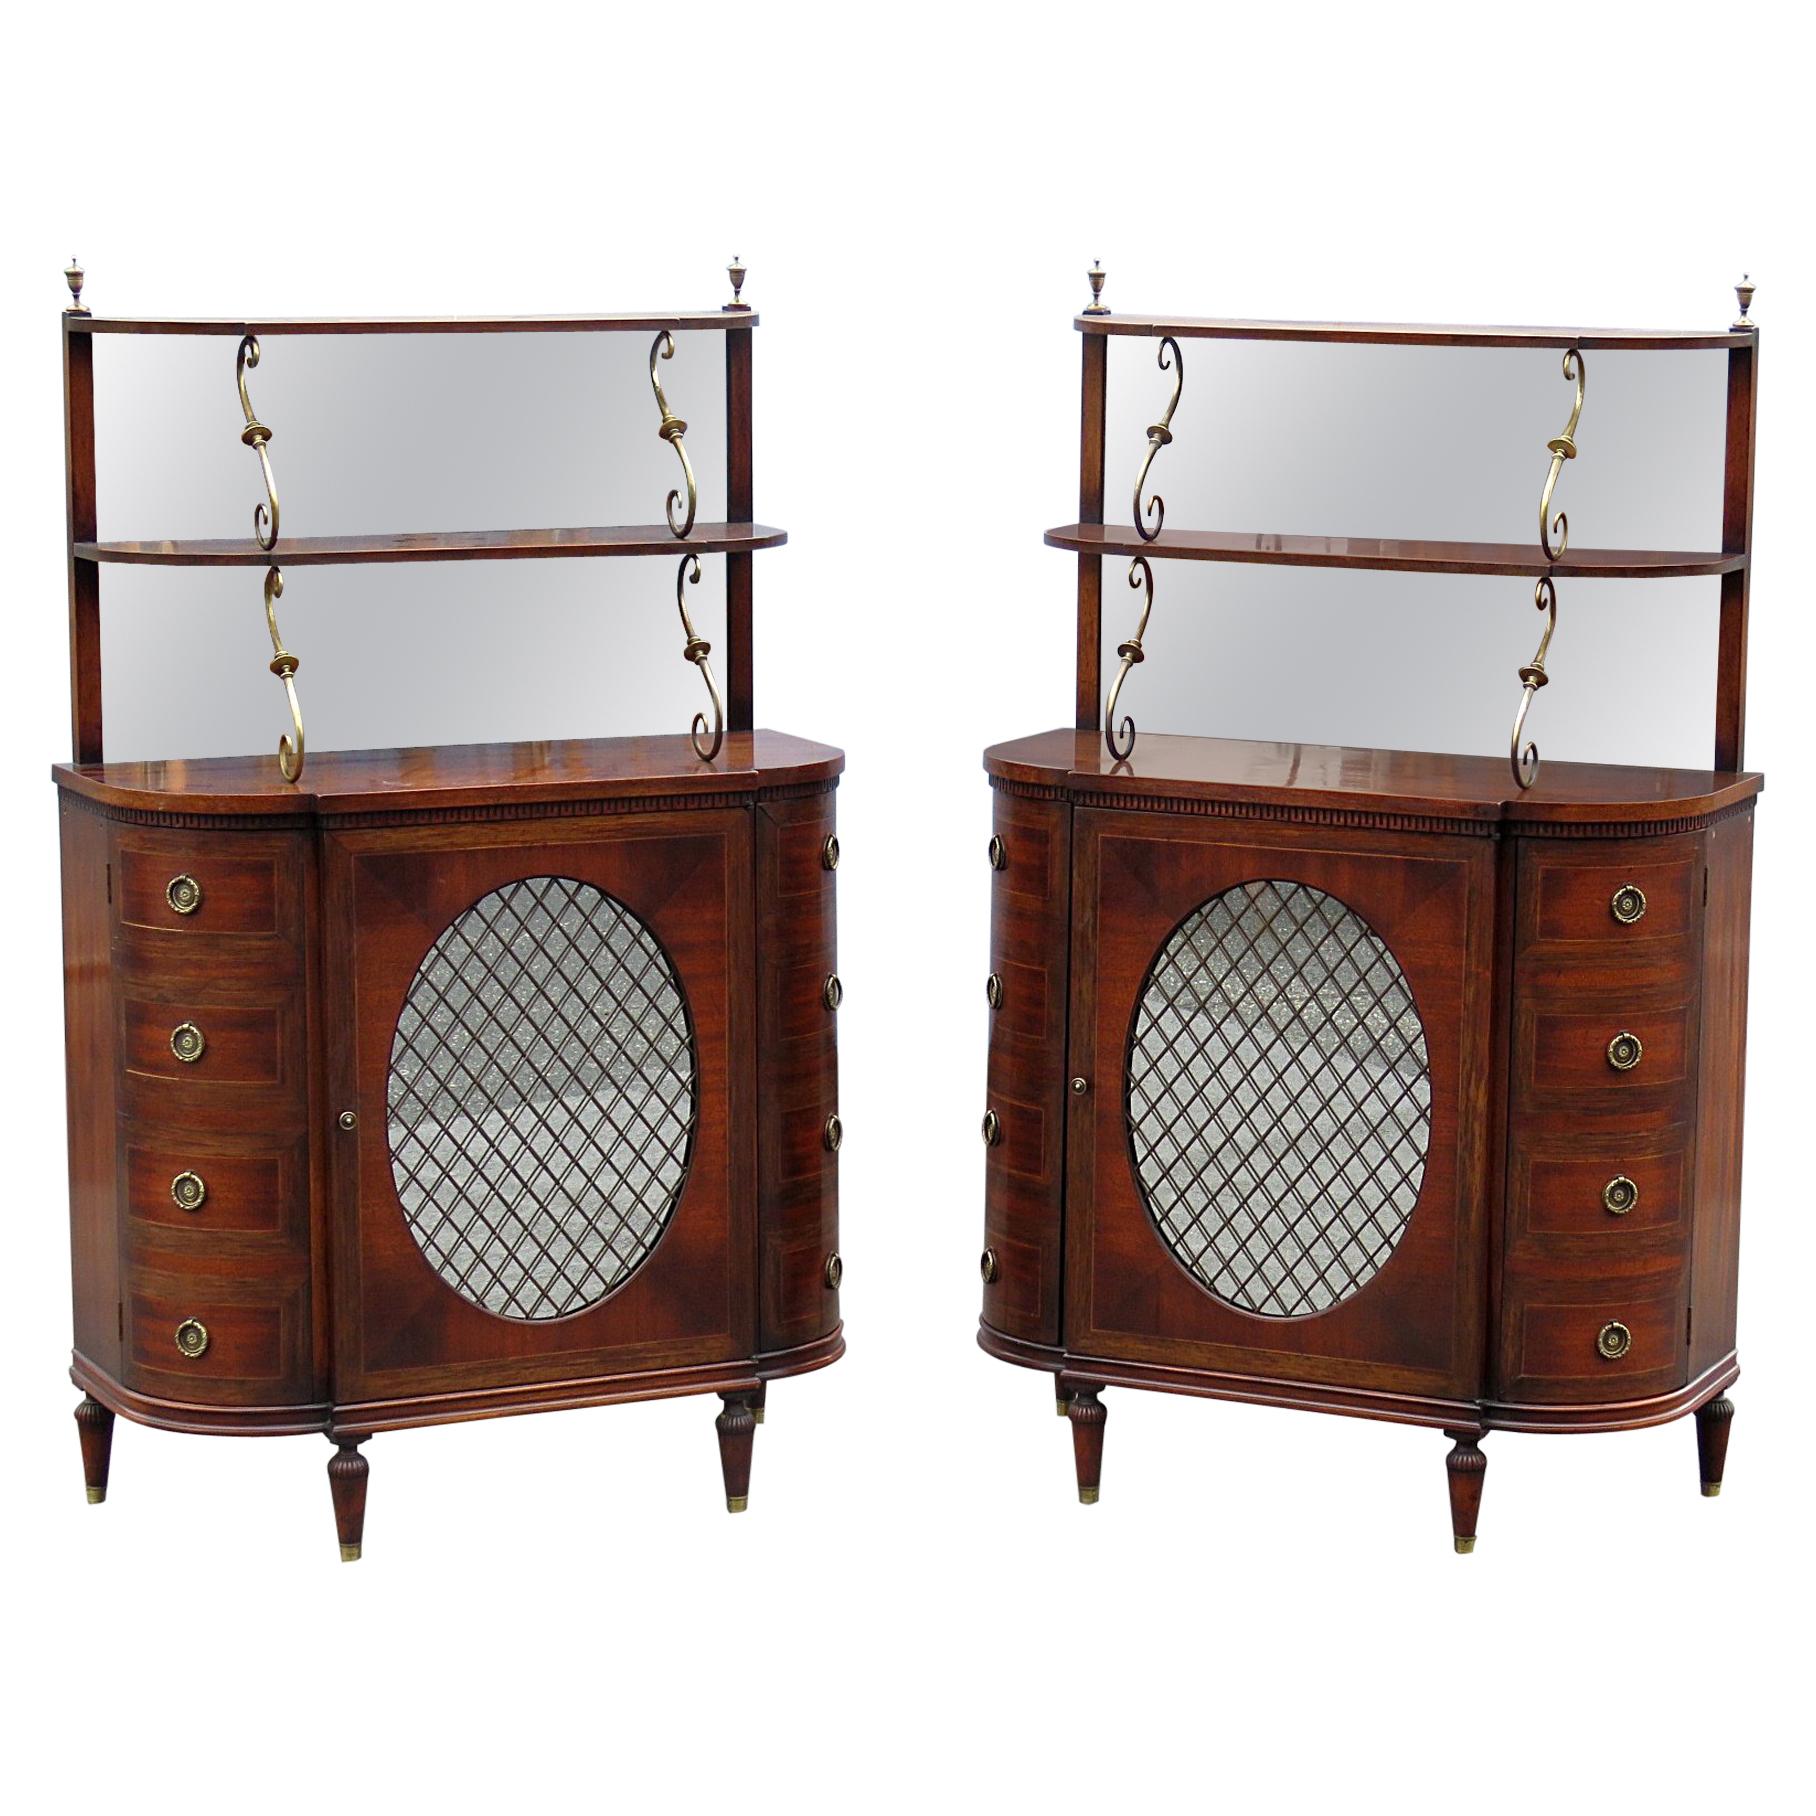 Matched Pair of Mahogany English Regency Style Servers Buffet Sideboards